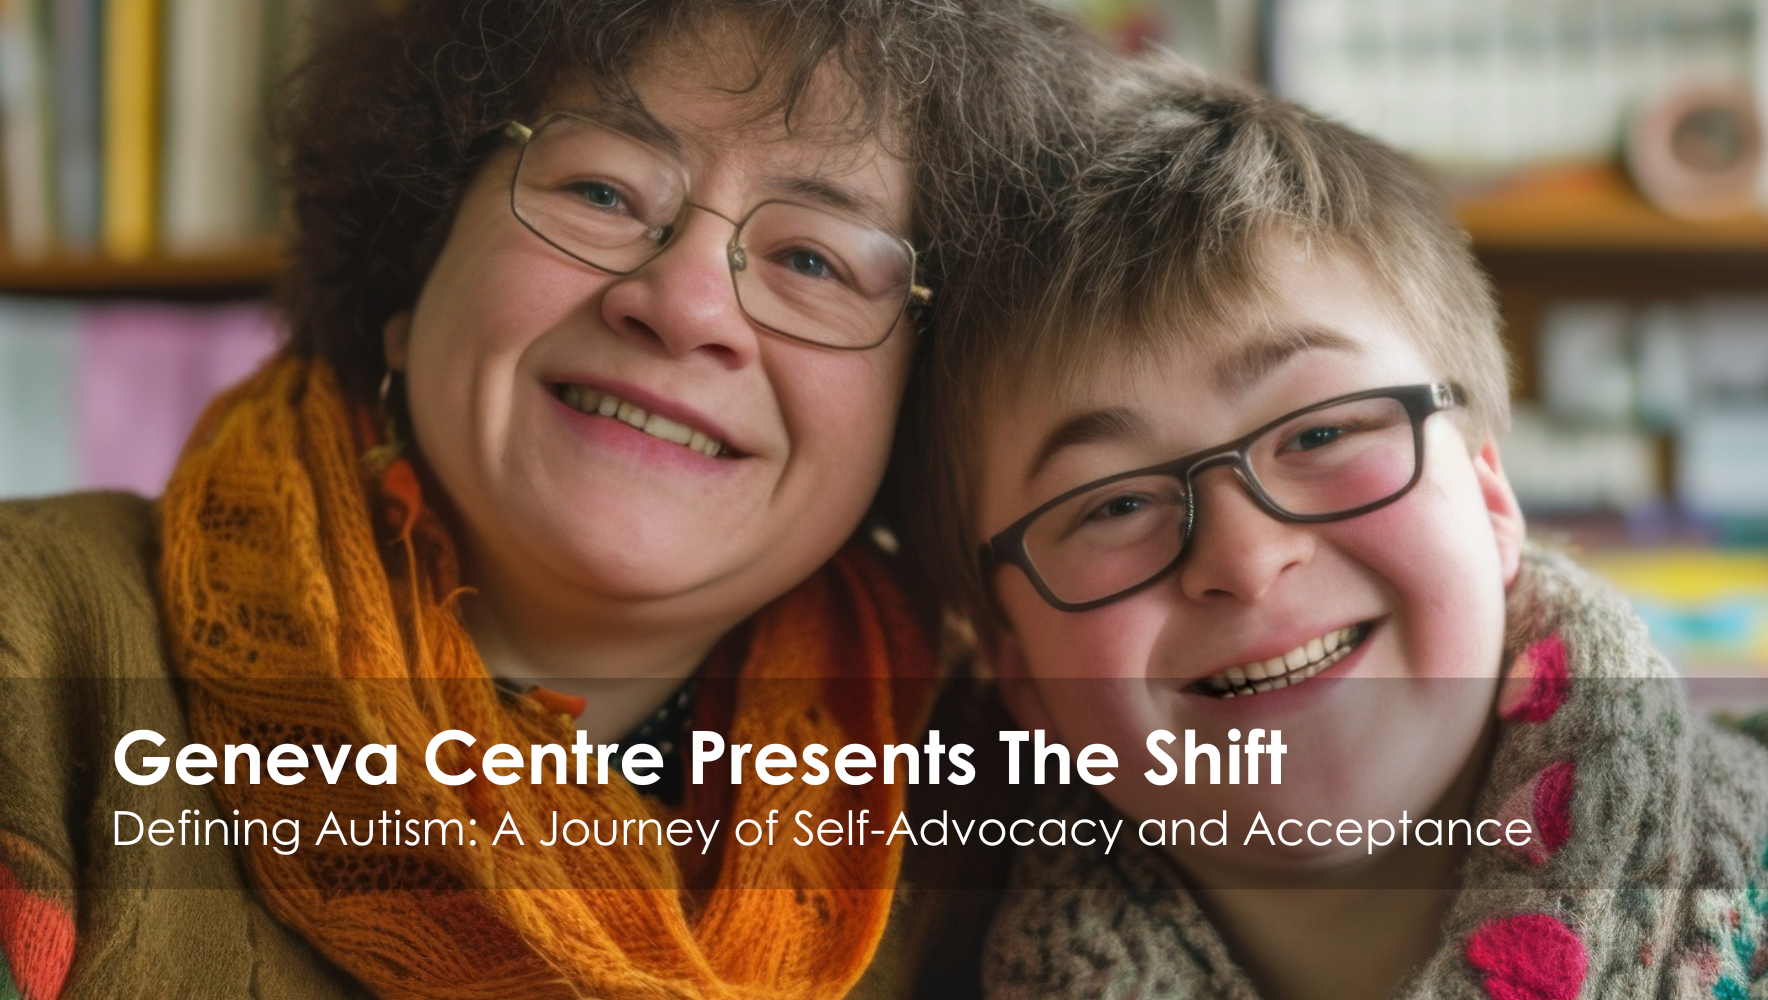 The Shift: Defining Autism: A Journey of  Self-Advocacy and Acceptance